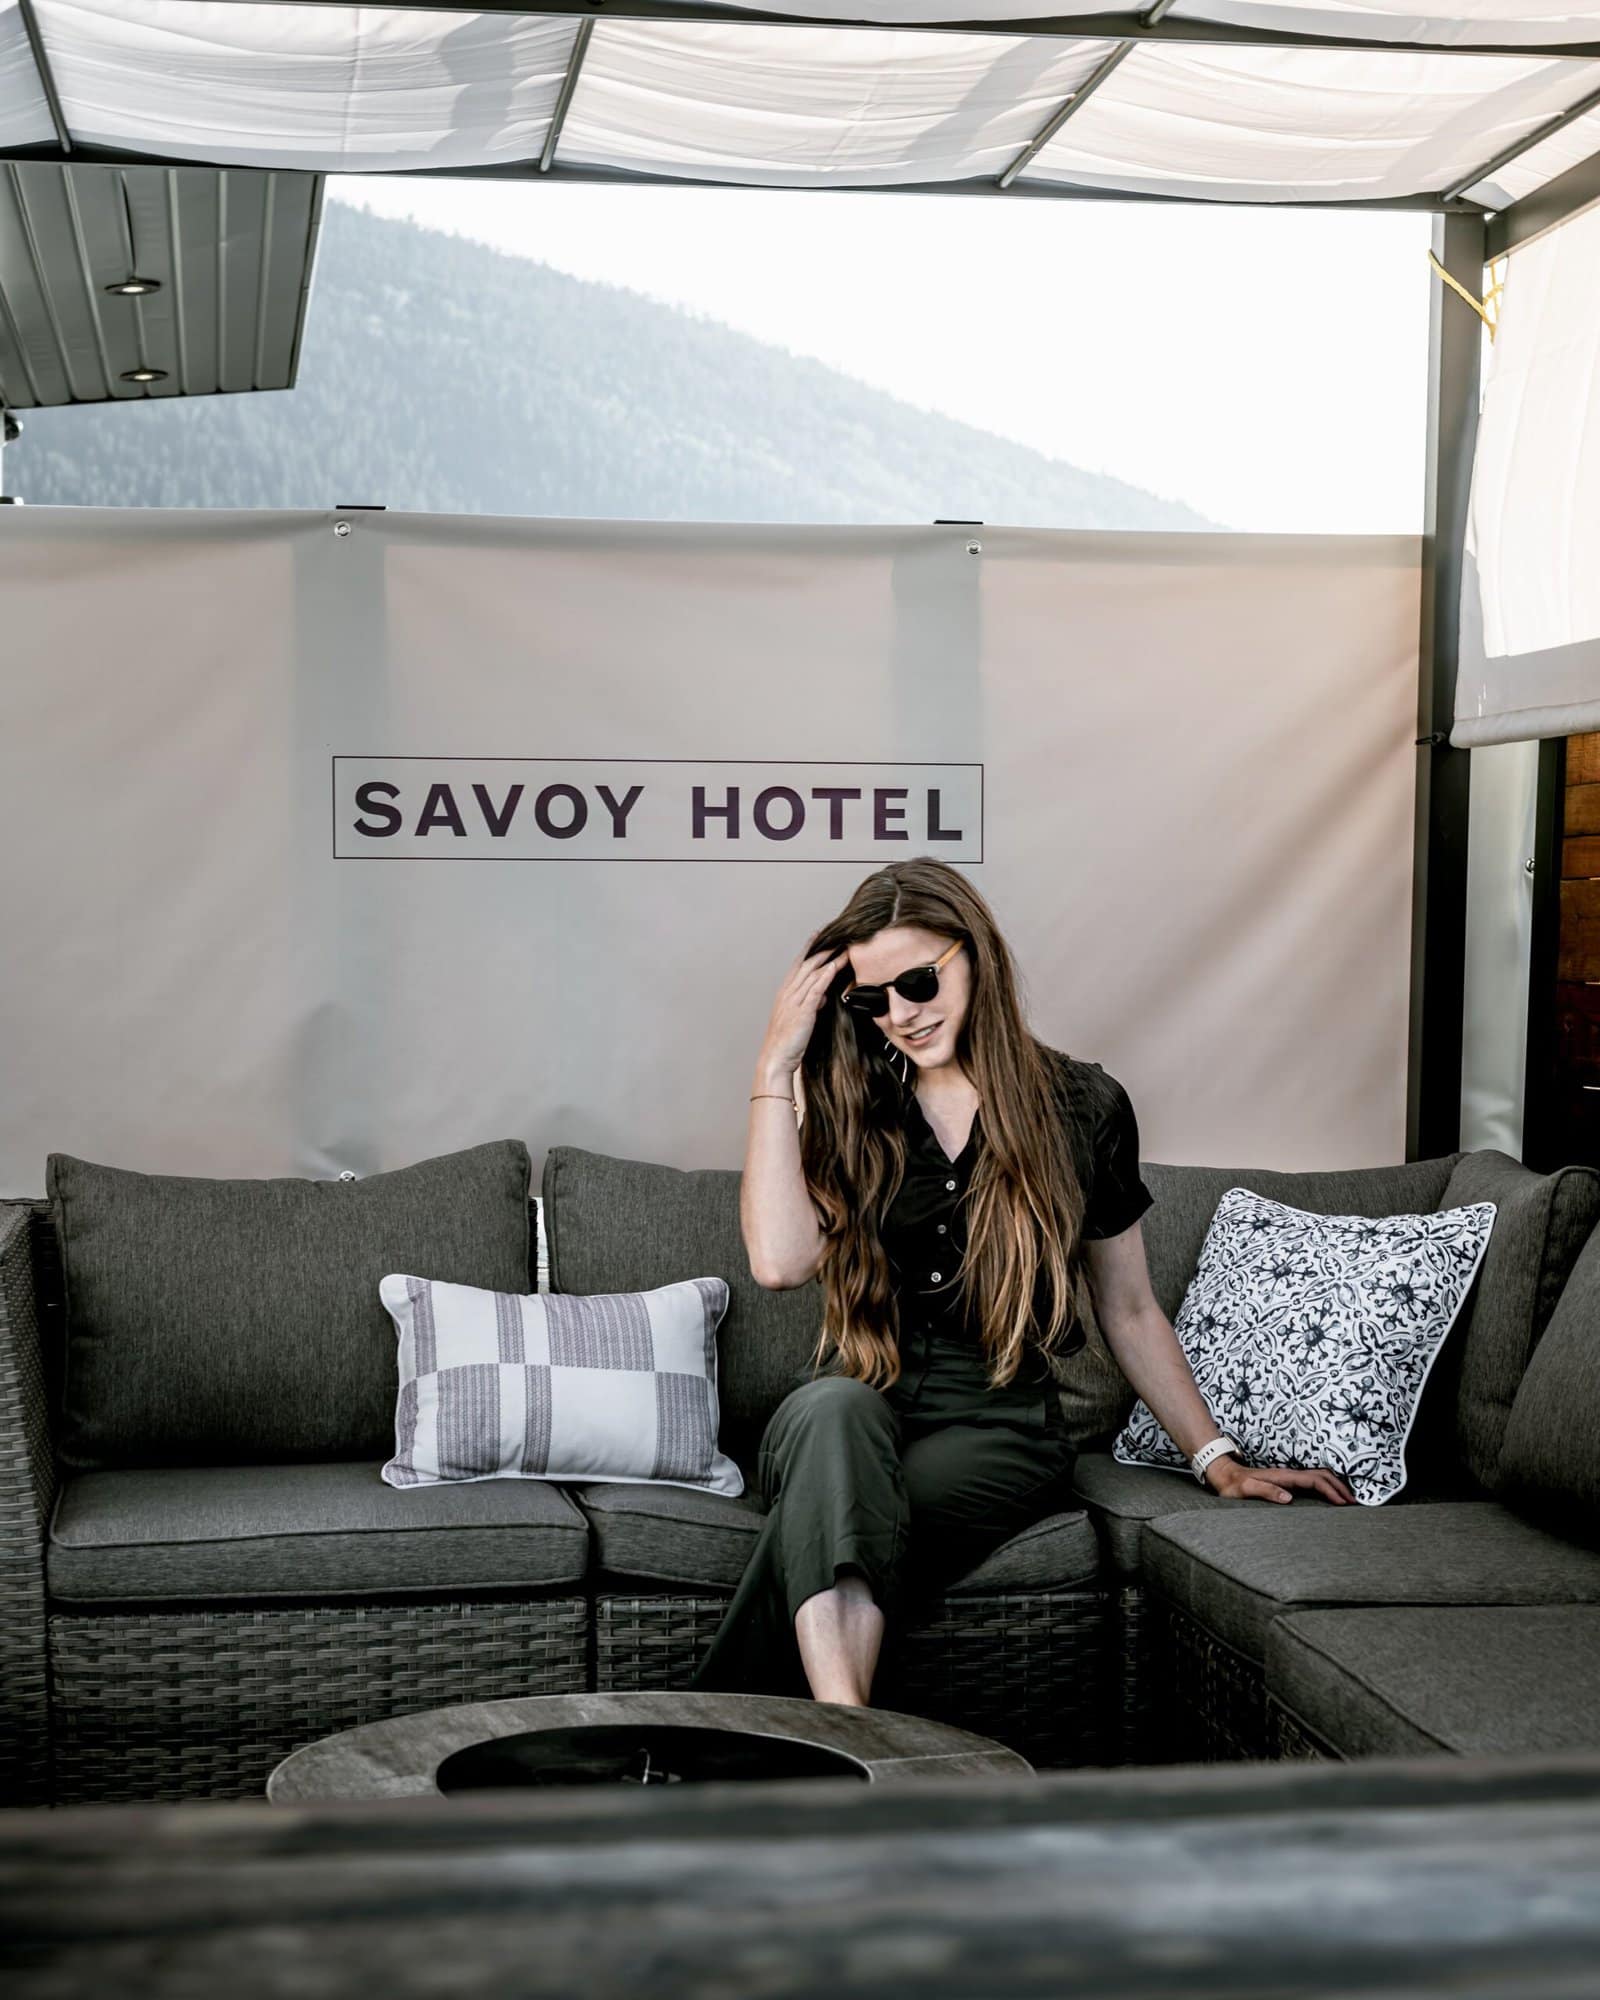 Savoy hotel nelson bc review rooftop